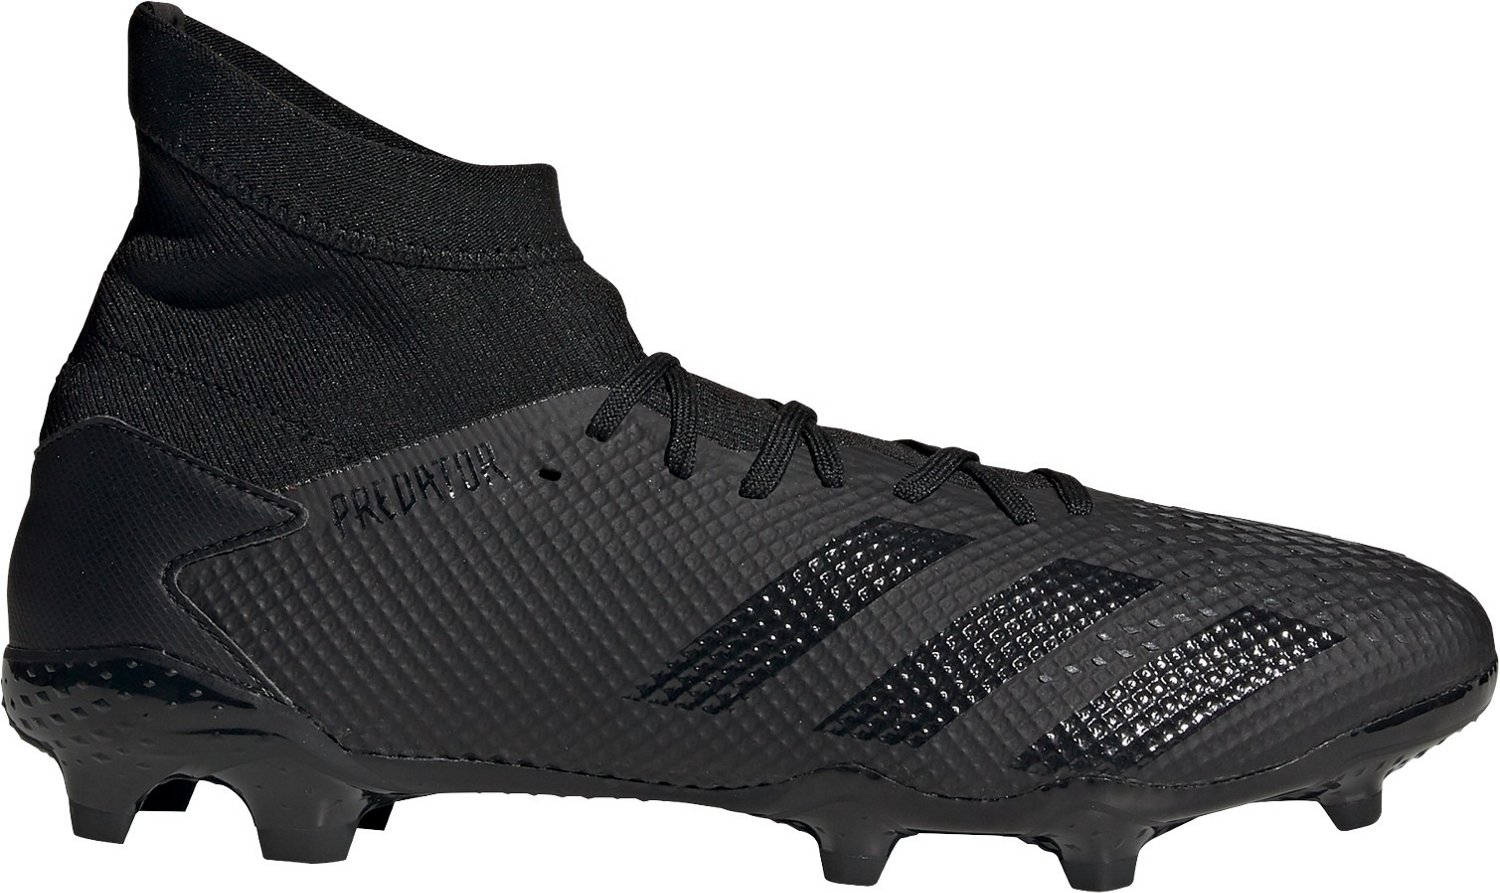 academy sports mens soccer cleats